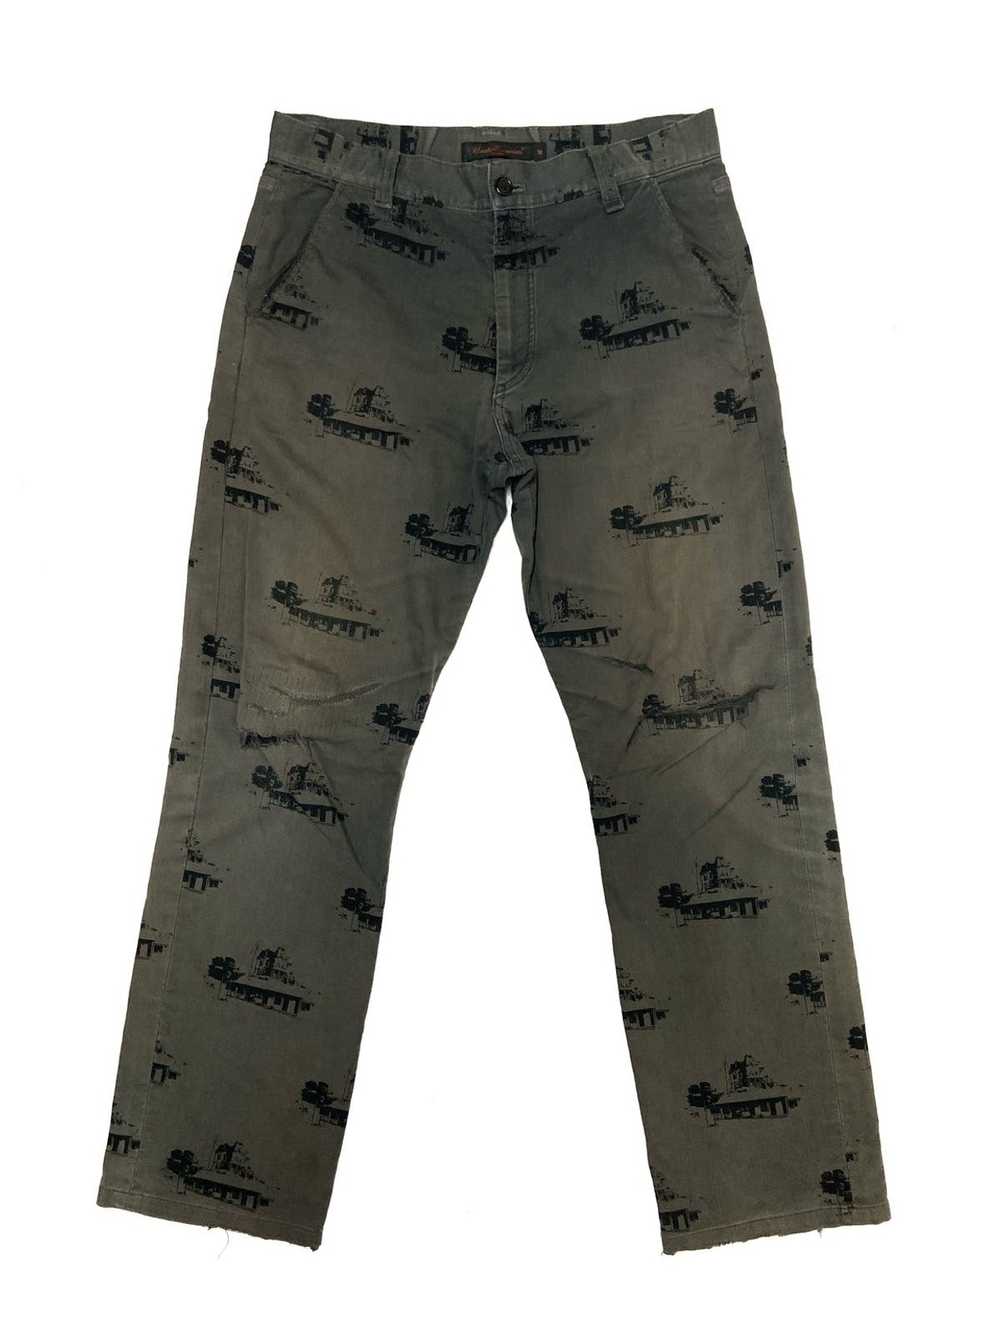 Undercover Undercover AW02 Psycho House Pants Wit… - image 1